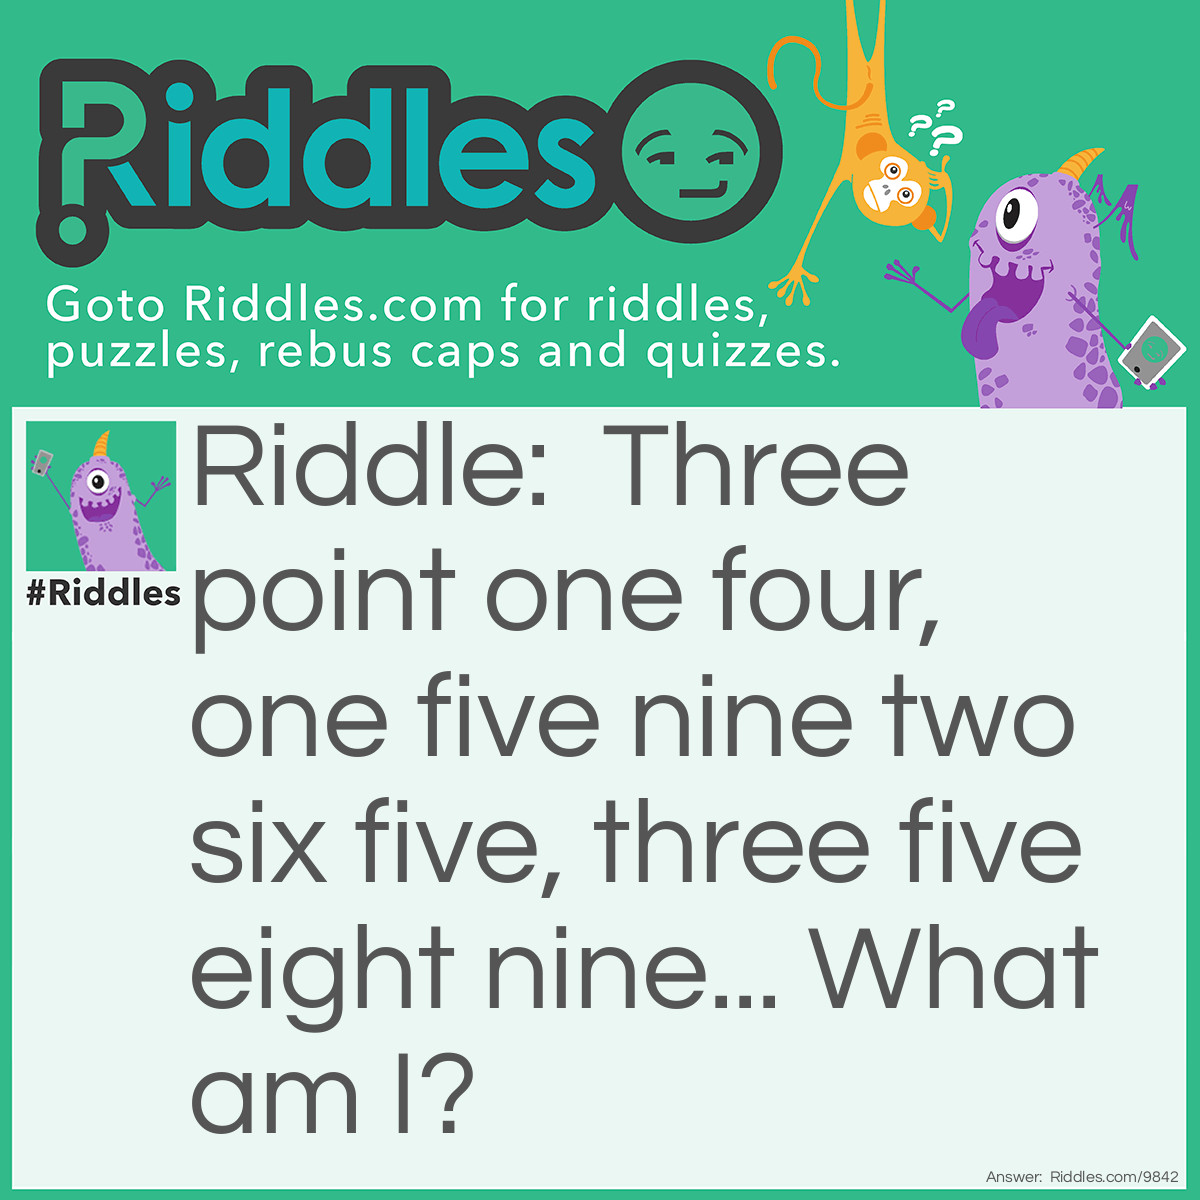 Riddle: Three point one four, one five nine two six five, three five eight nine... What am I? Answer: Pi - π.